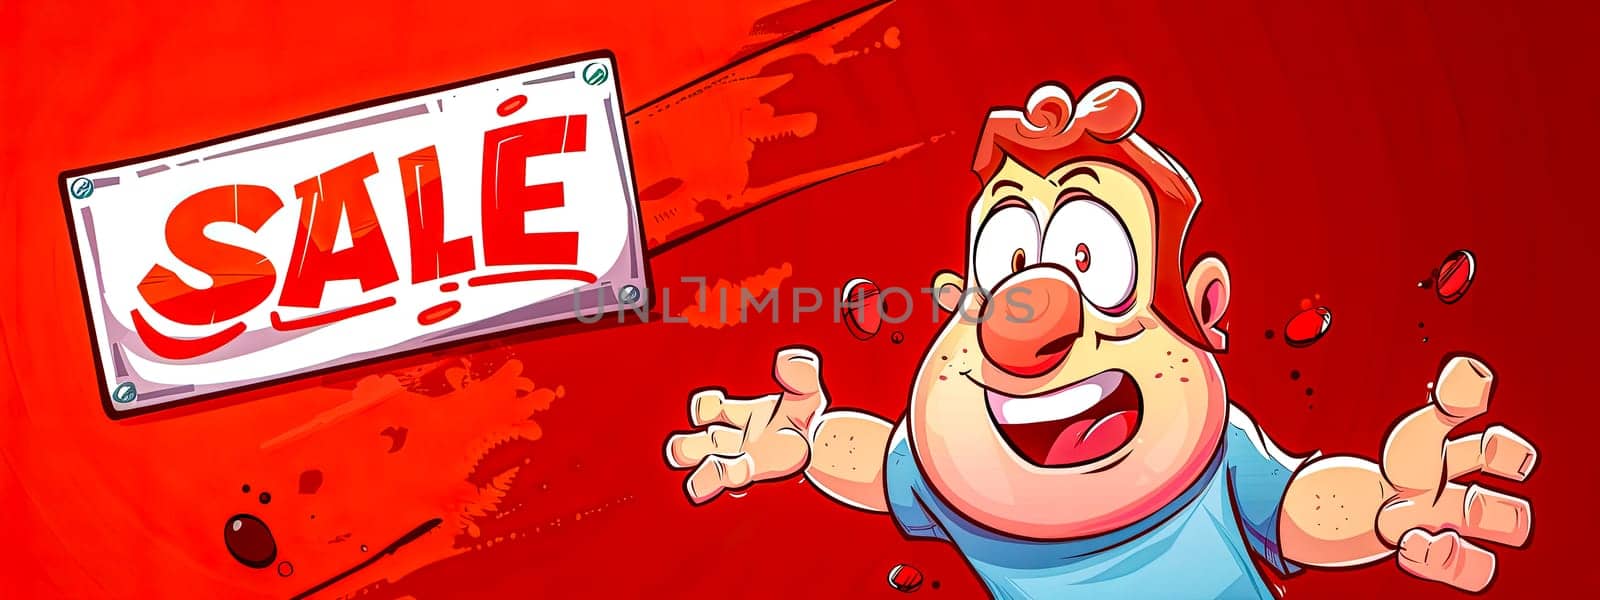 Cheerful cartoon man celebrates a sale, with splashes of red and a bold sign